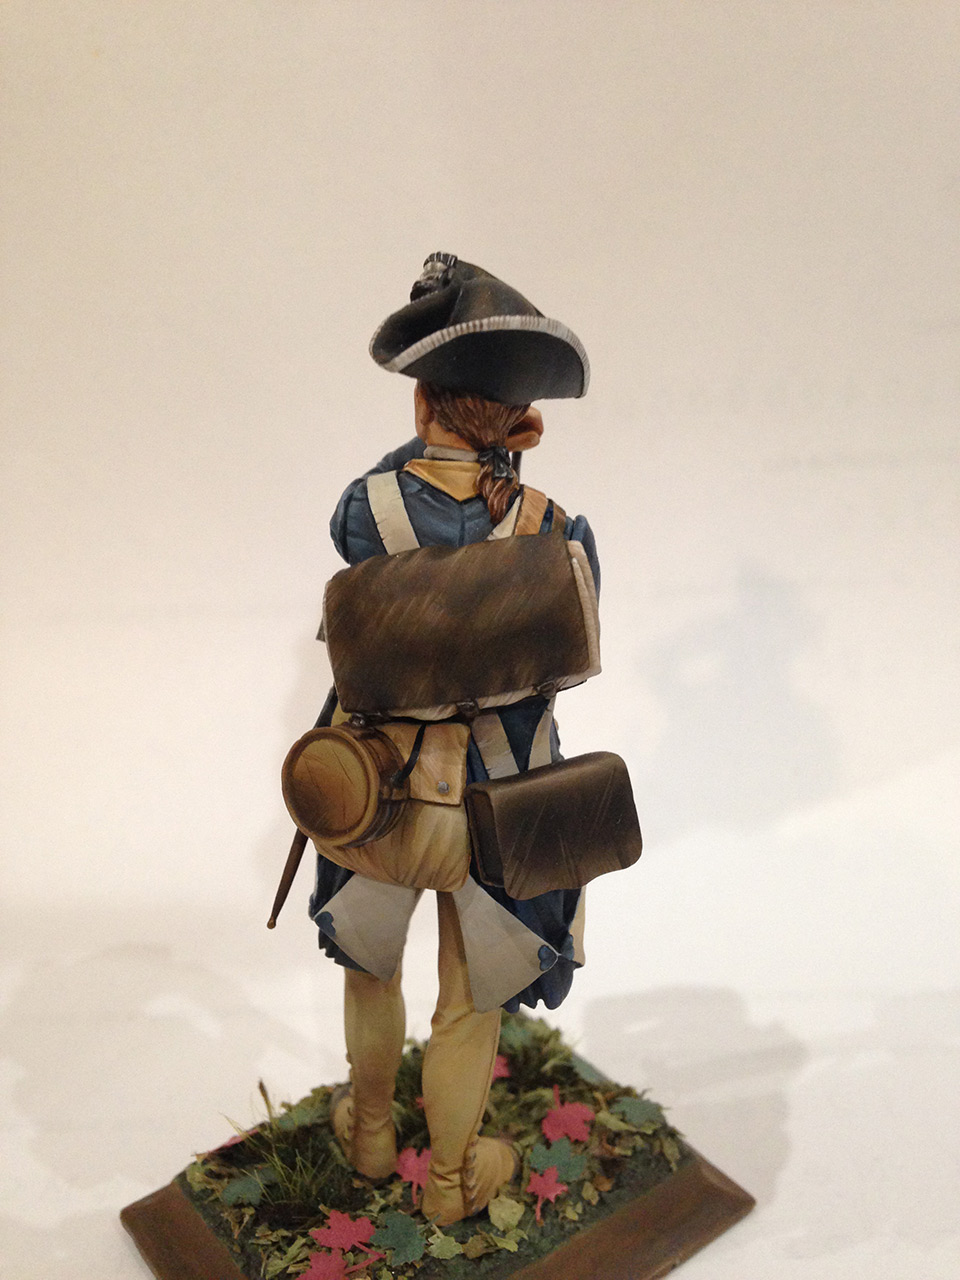 Figures: Private, 1st New York regt. of Continental Army, photo #3